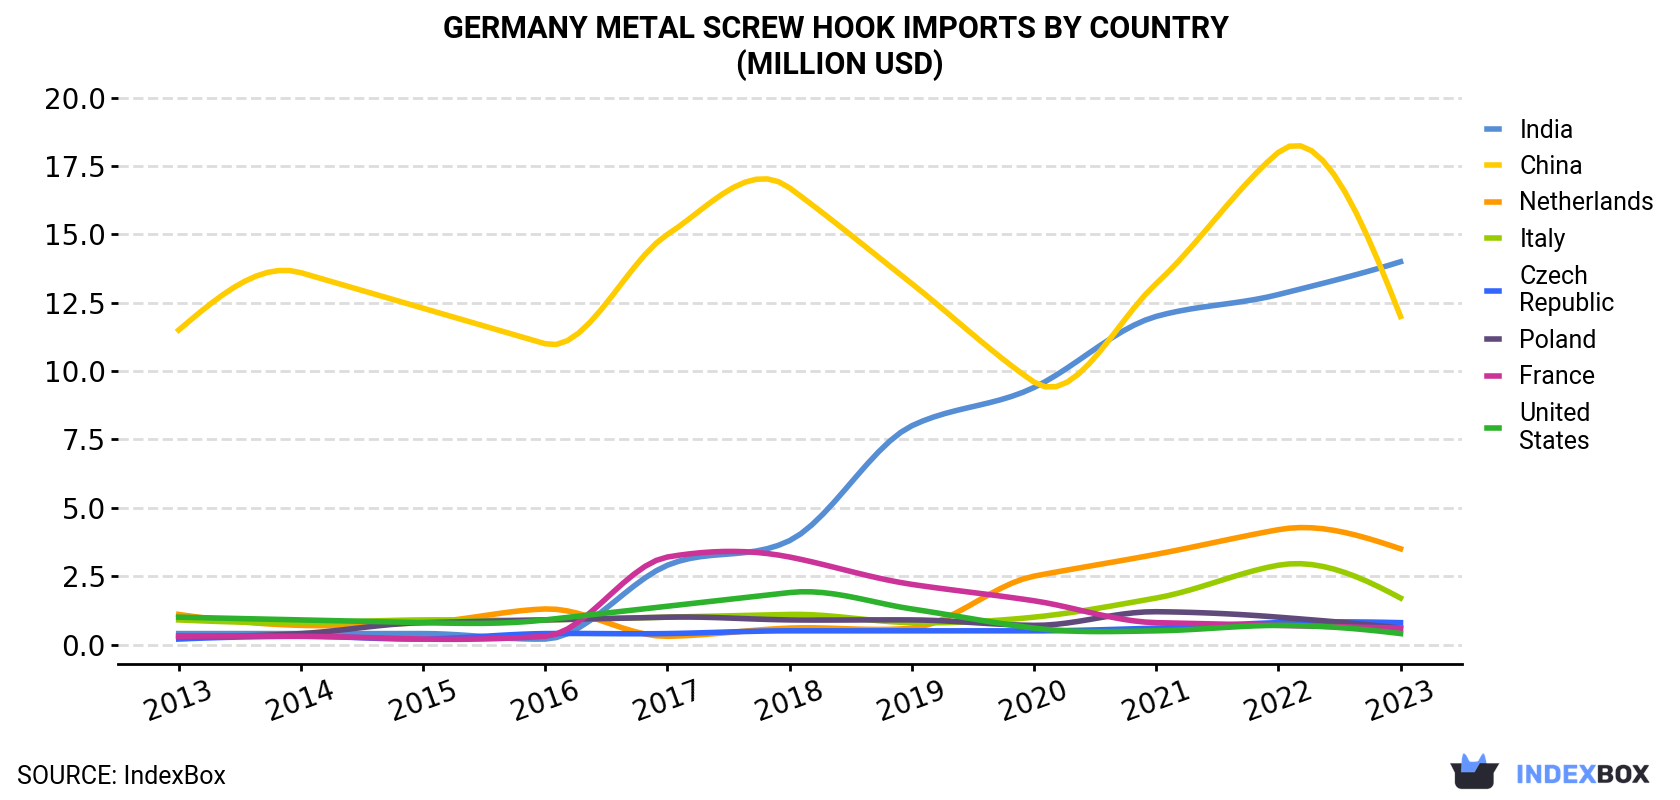 Germany Metal Screw Hook Imports By Country (Million USD)